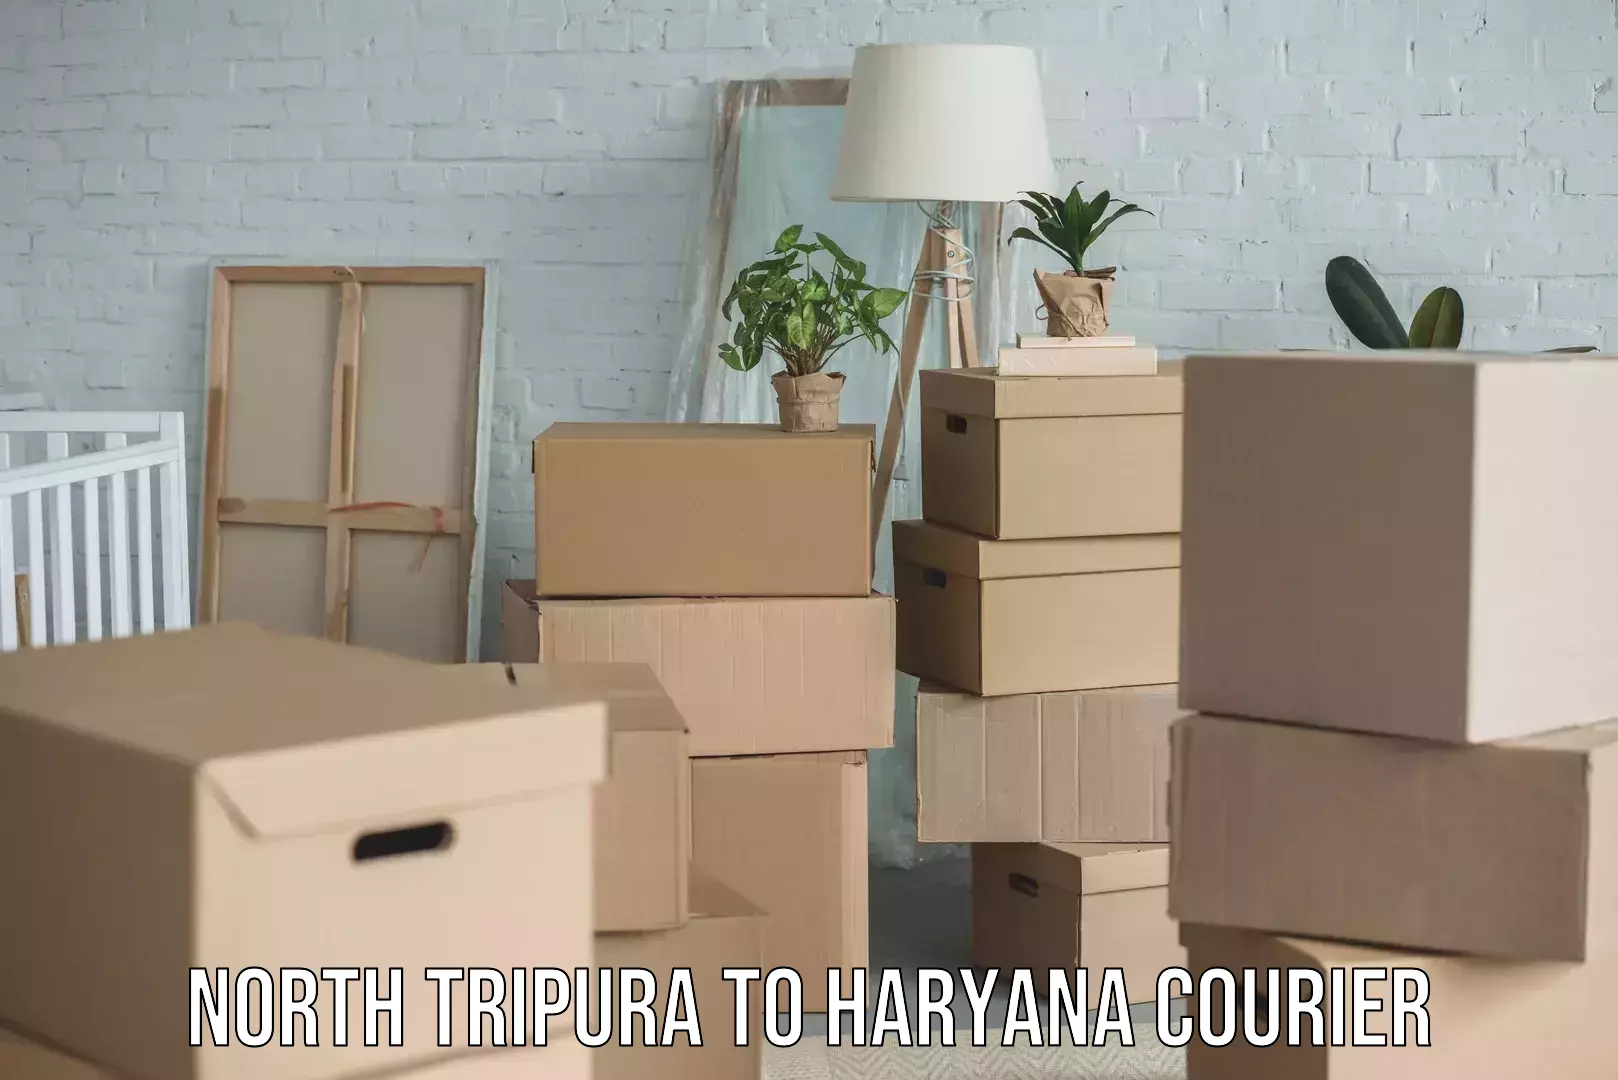 Sustainable courier practices North Tripura to Haryana